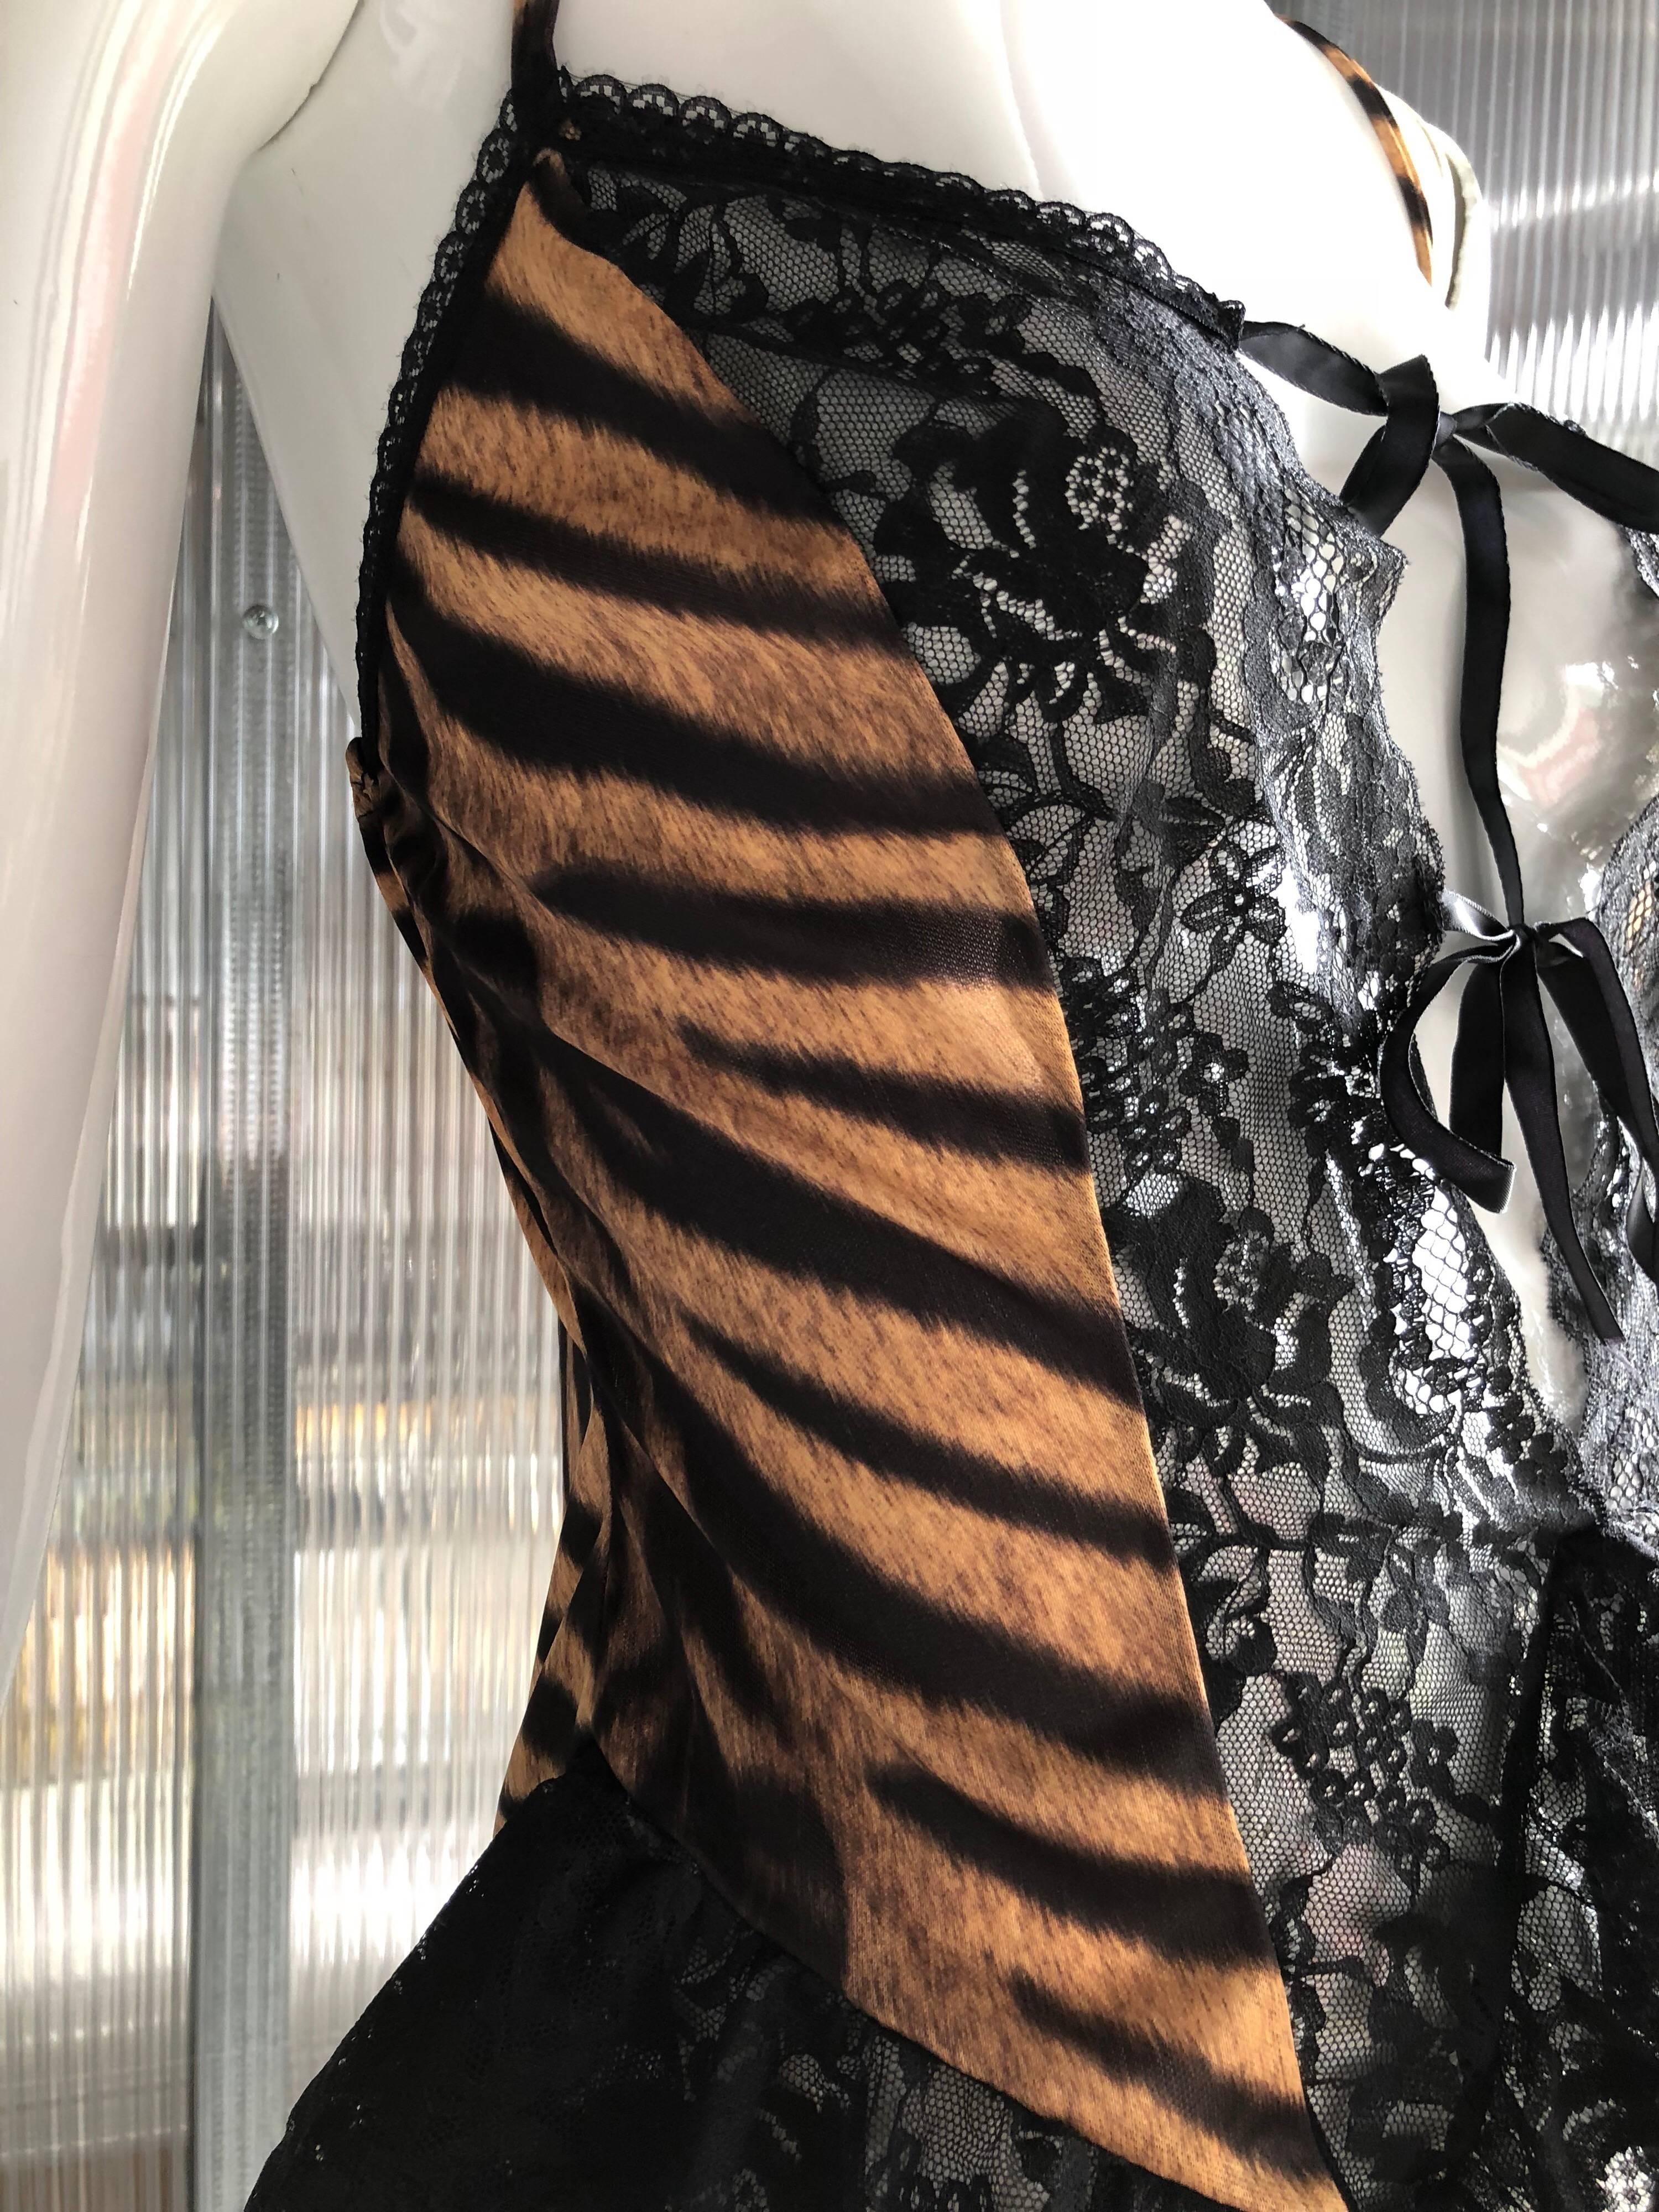 1980s Made in London from Fenwicks department store on Bond Street. This stretch jersey print tiger stripe lingerie top features black lace trimmings and ribbon tie front. 
Garters are optional and fits a perfect size medium. 